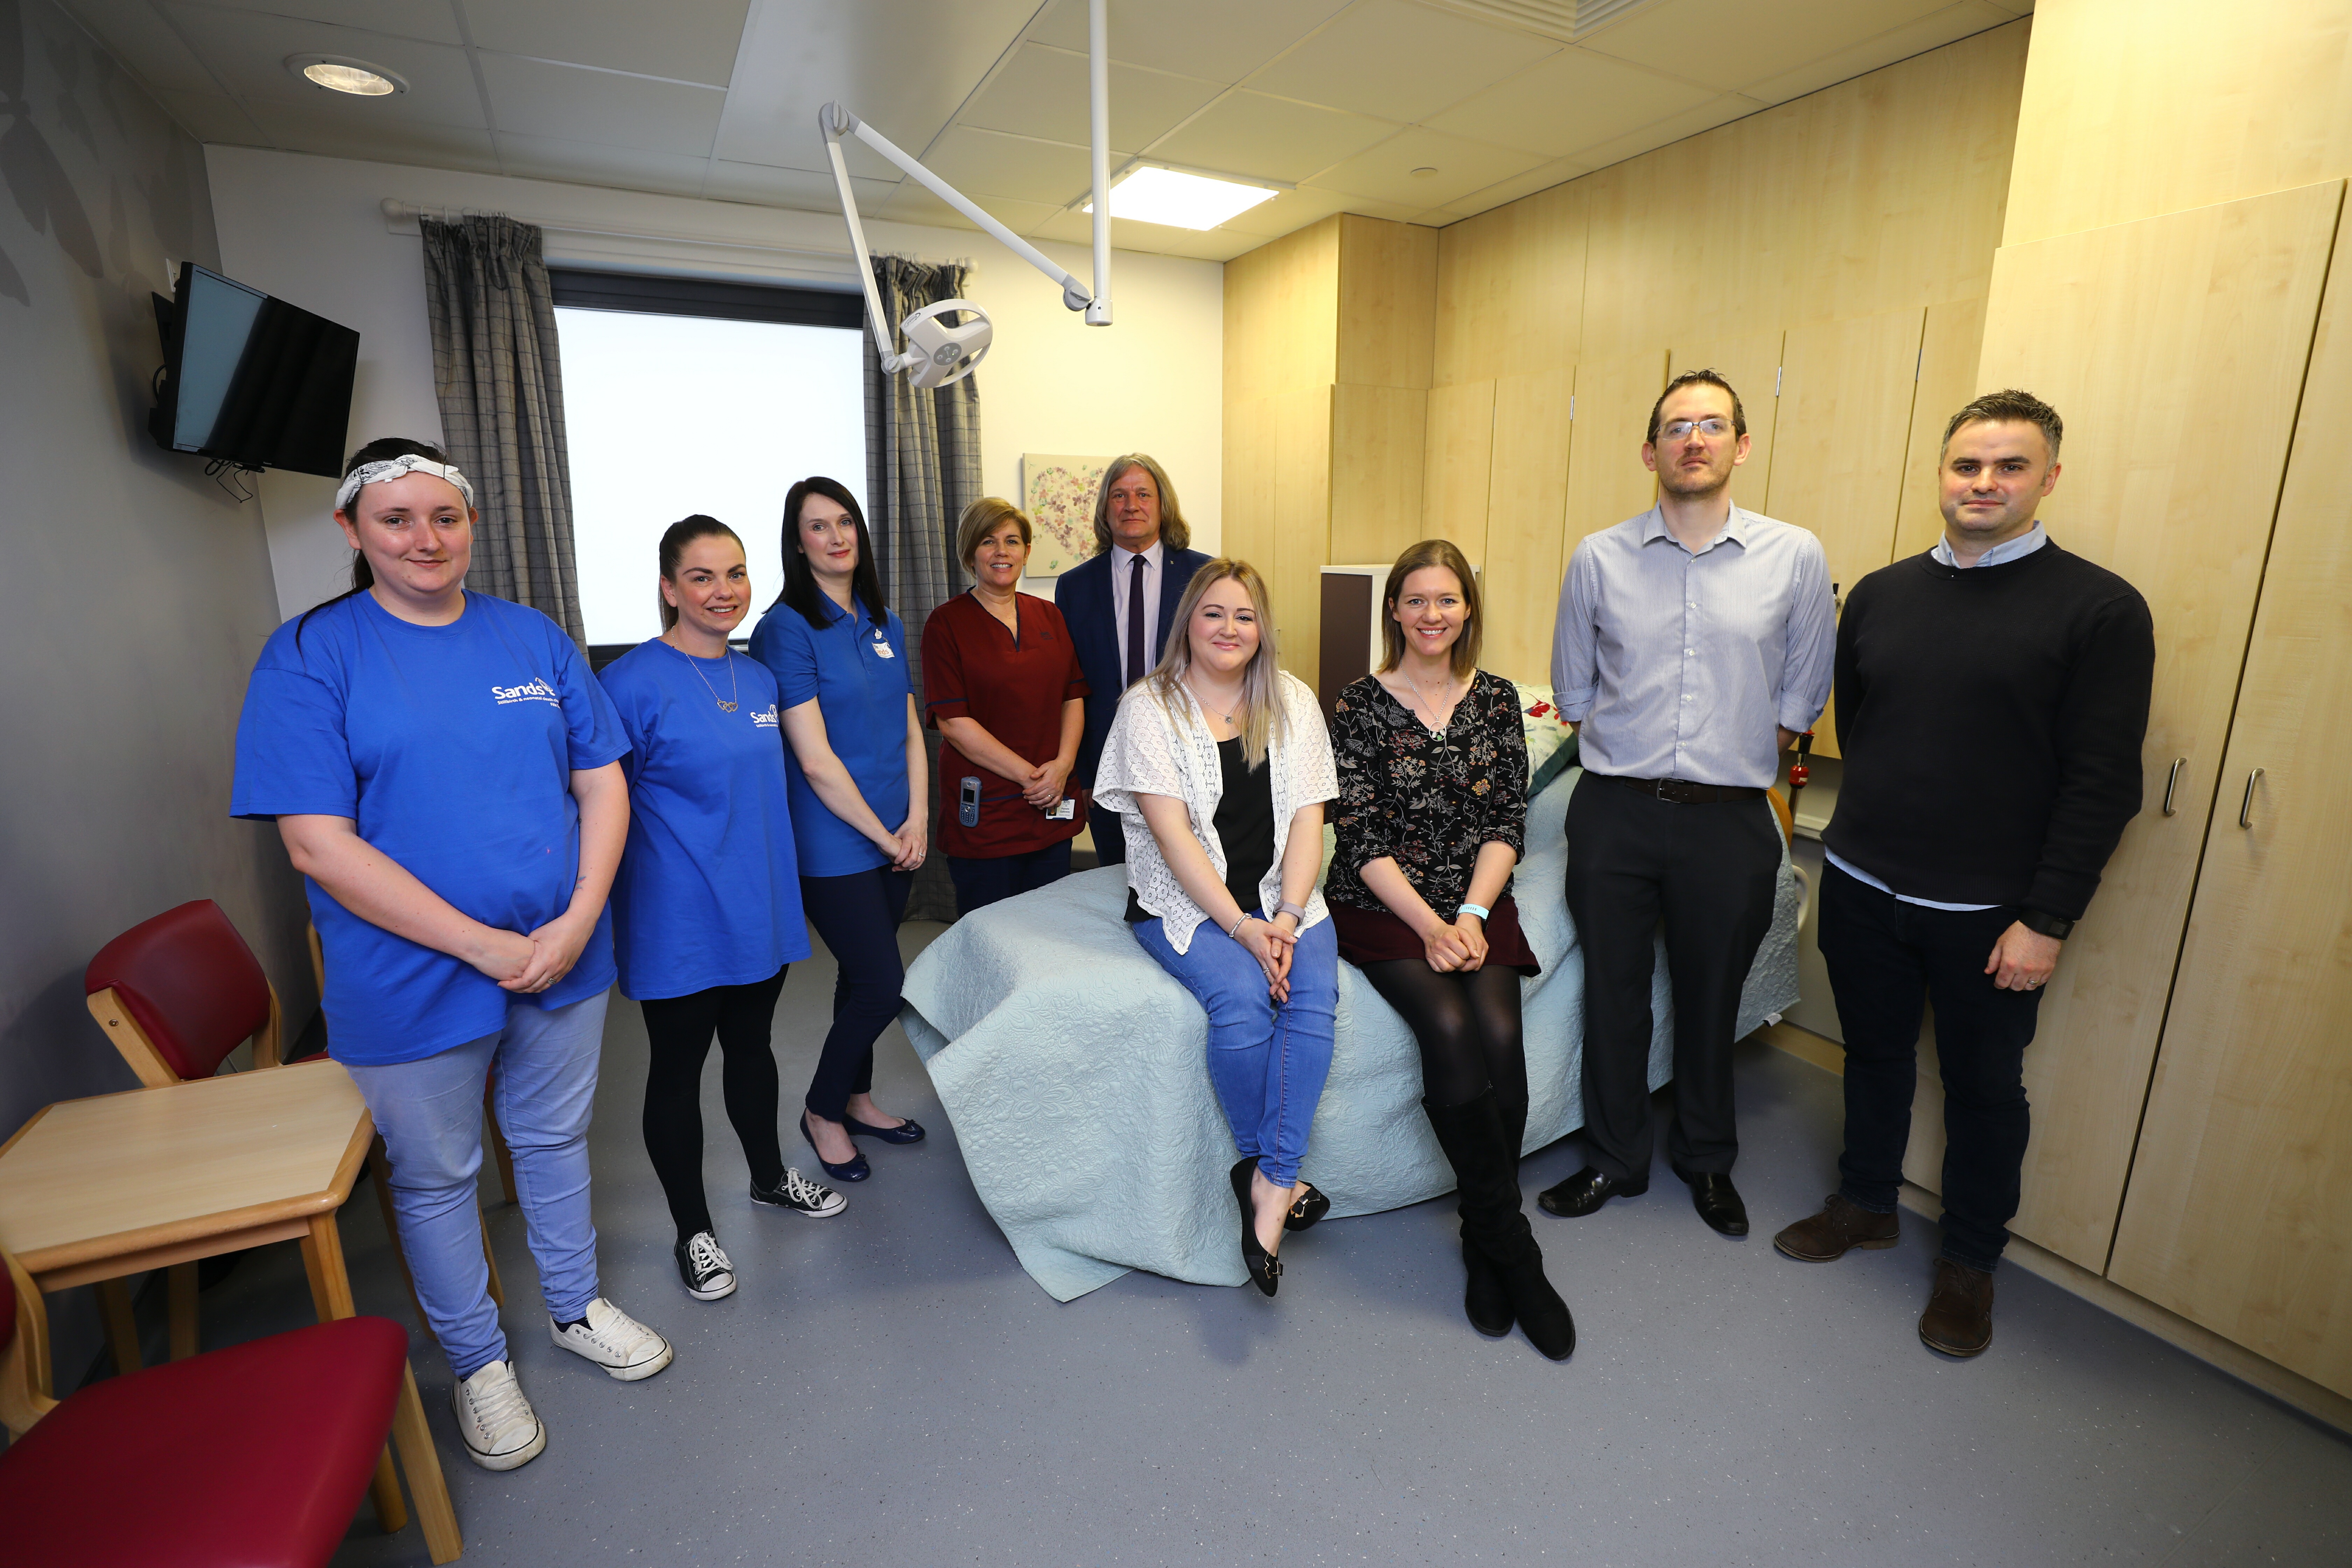 Lyndsay Smith, Fiona Taylor, Janine Norris - all Fife Sands, Pamela Galloway - Midwifery Manager, David Torrance MSP, and front, Heather Slattery, Cathy Roberts, Mike Roberts and James Slattery - the main fundraisers, at the opening of the new bereavement suite at Victoria Hospital in Kirkcaldy today.